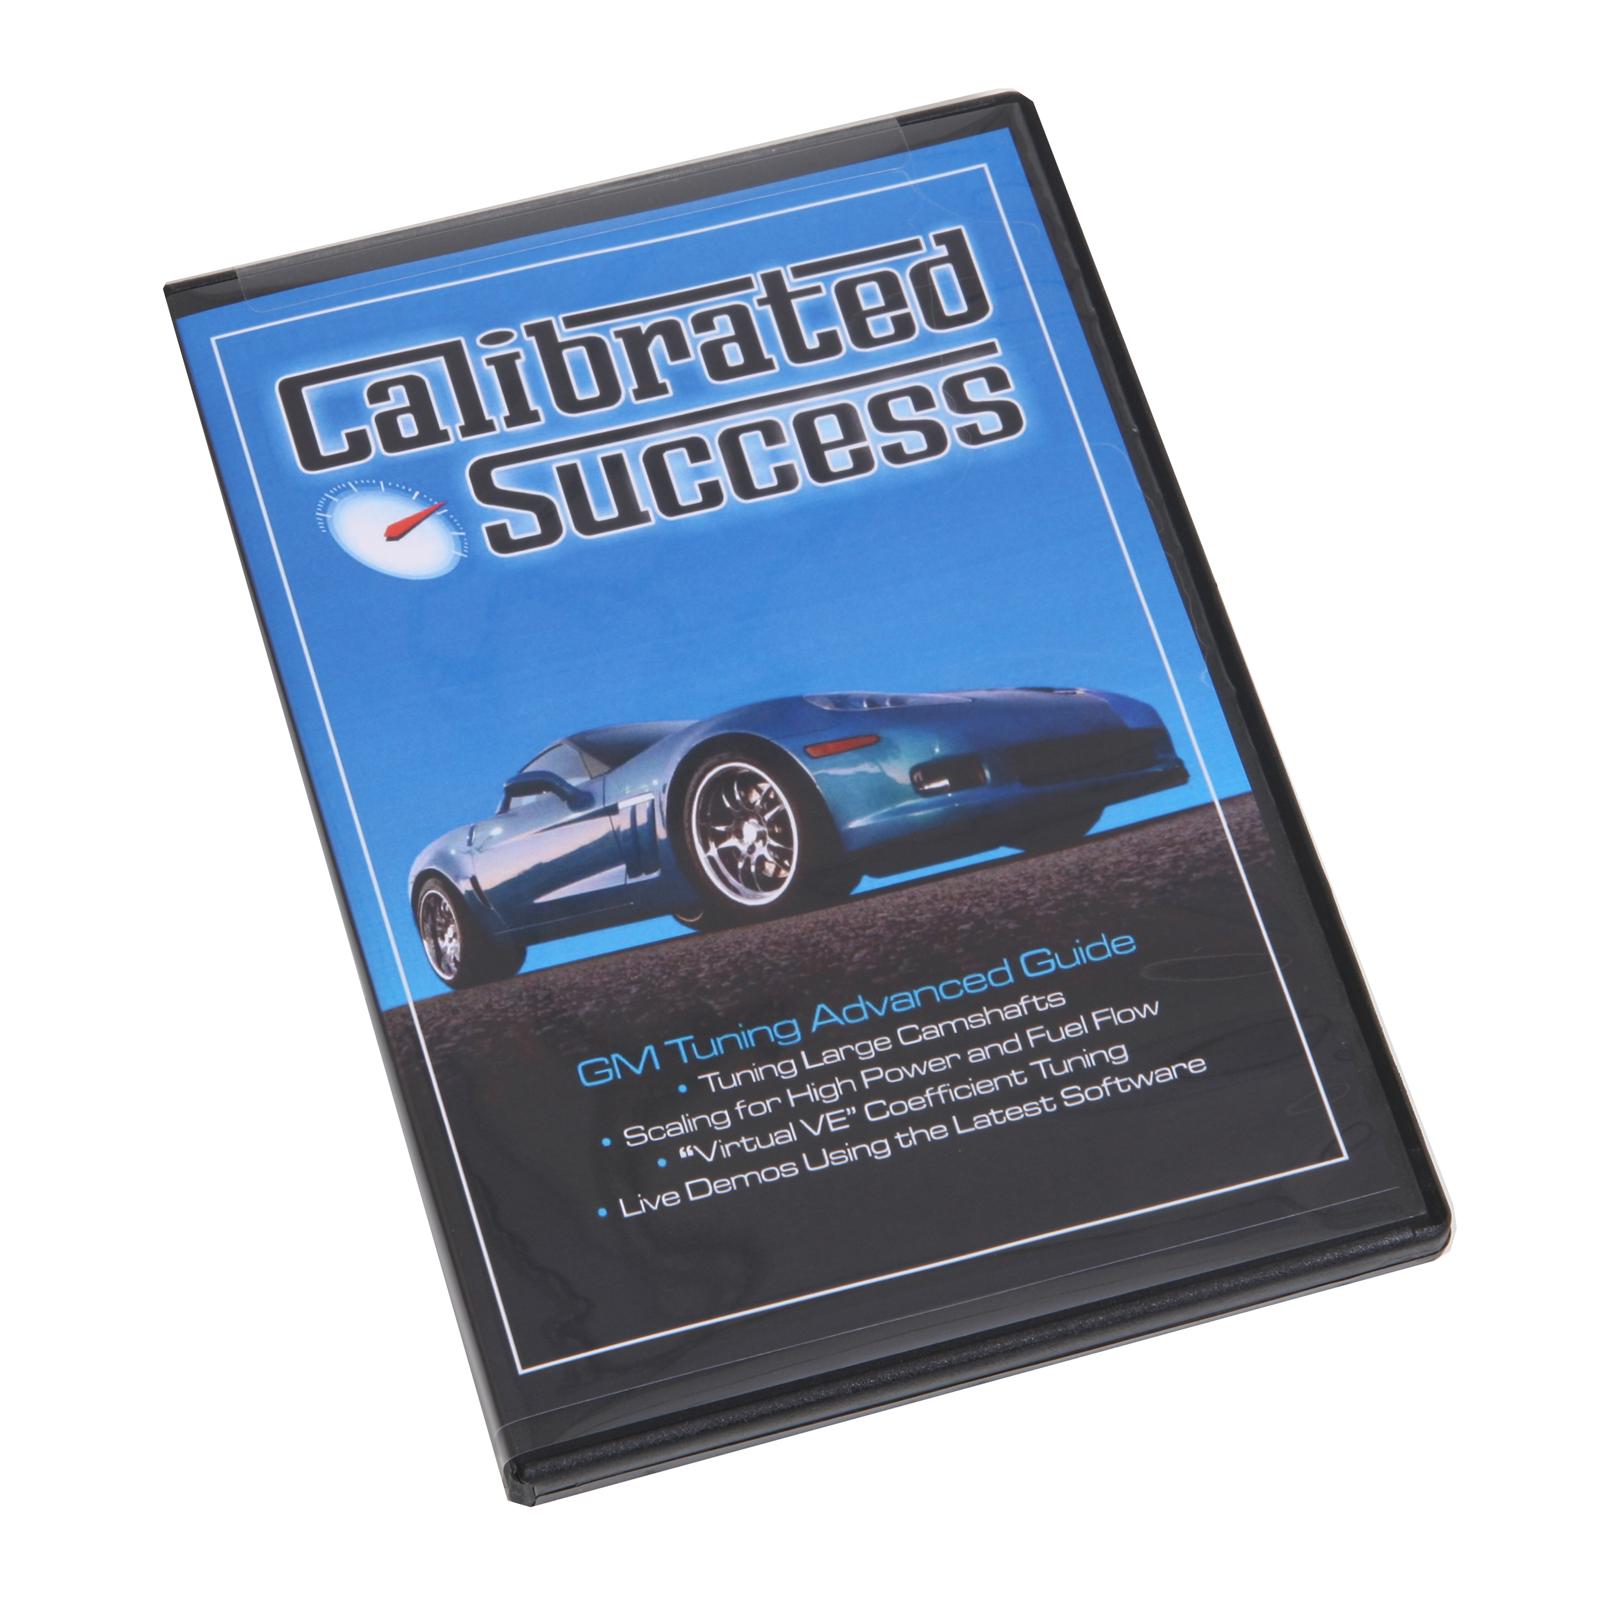 Calibrated success ford dvd #1